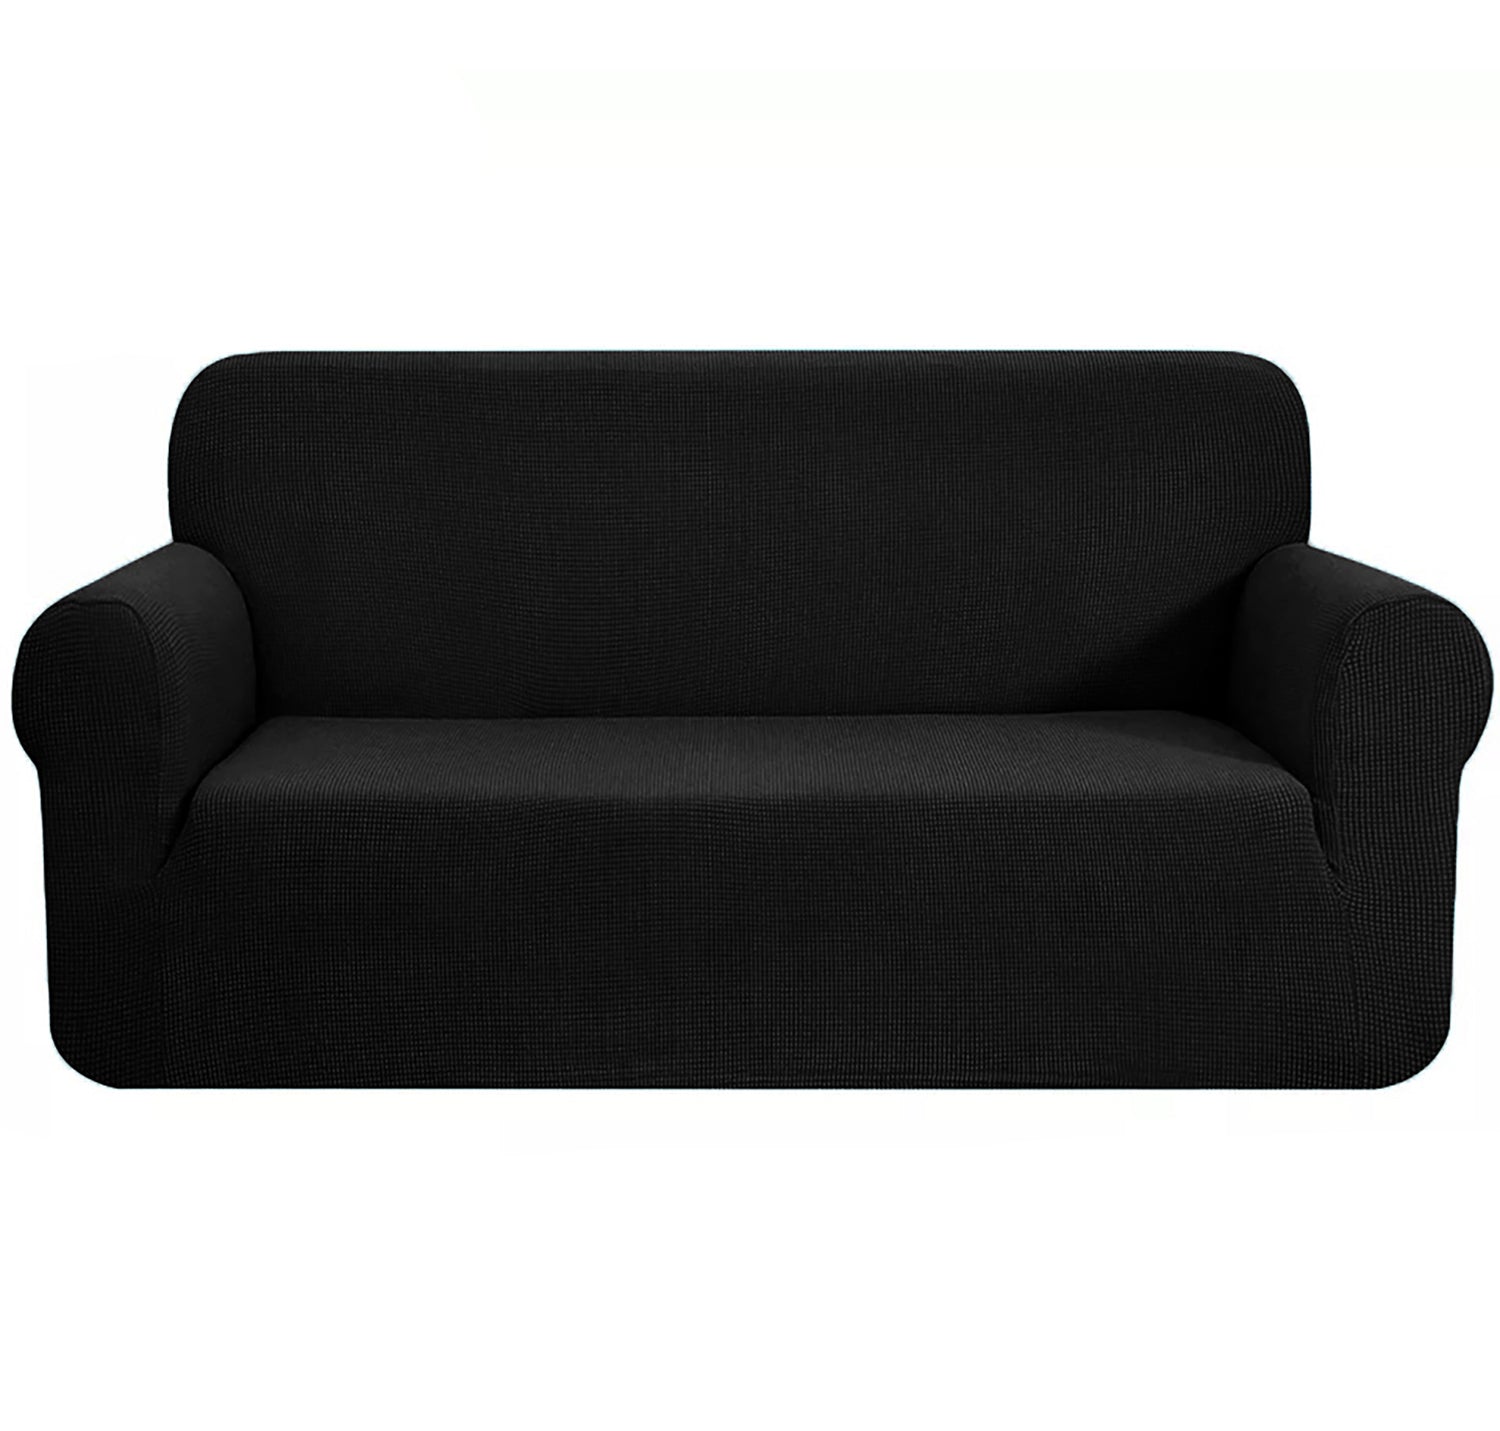 Black 2-Piece Set Slipcover Sofa & Loveseat Cover Protector 4-Way Stretch Elastic